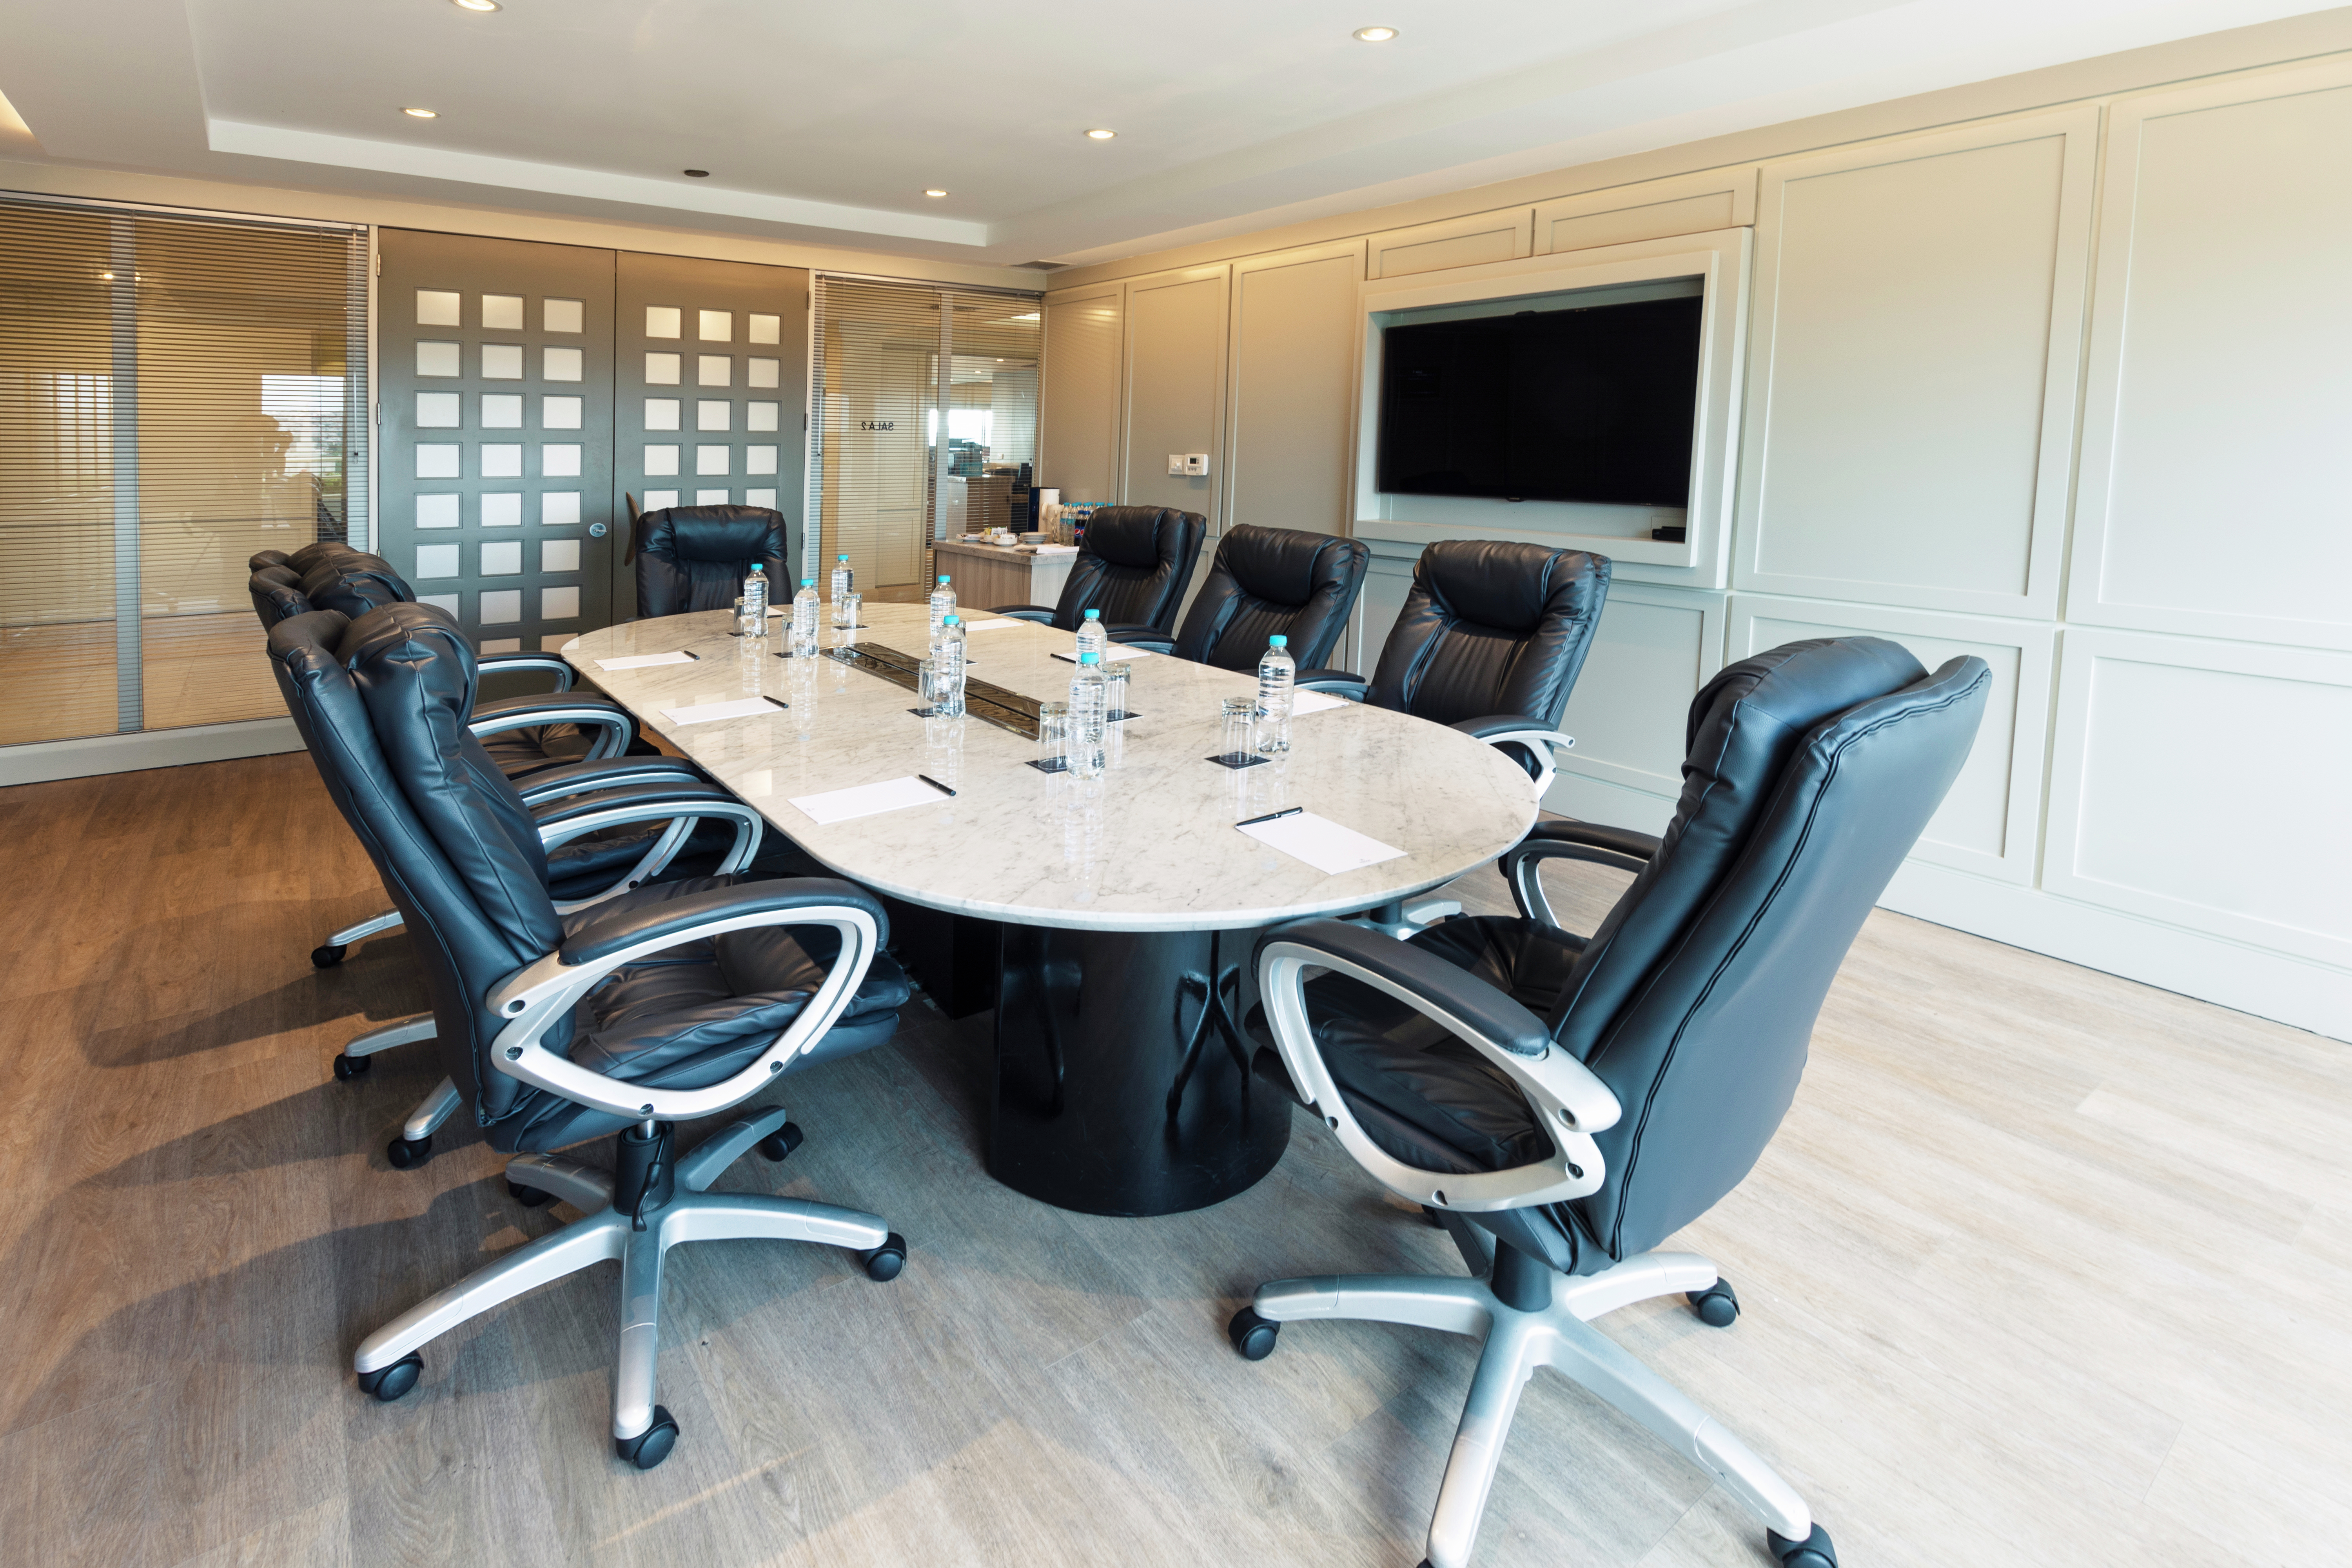 Boardroom with HDTV and Seating for 8 Guests